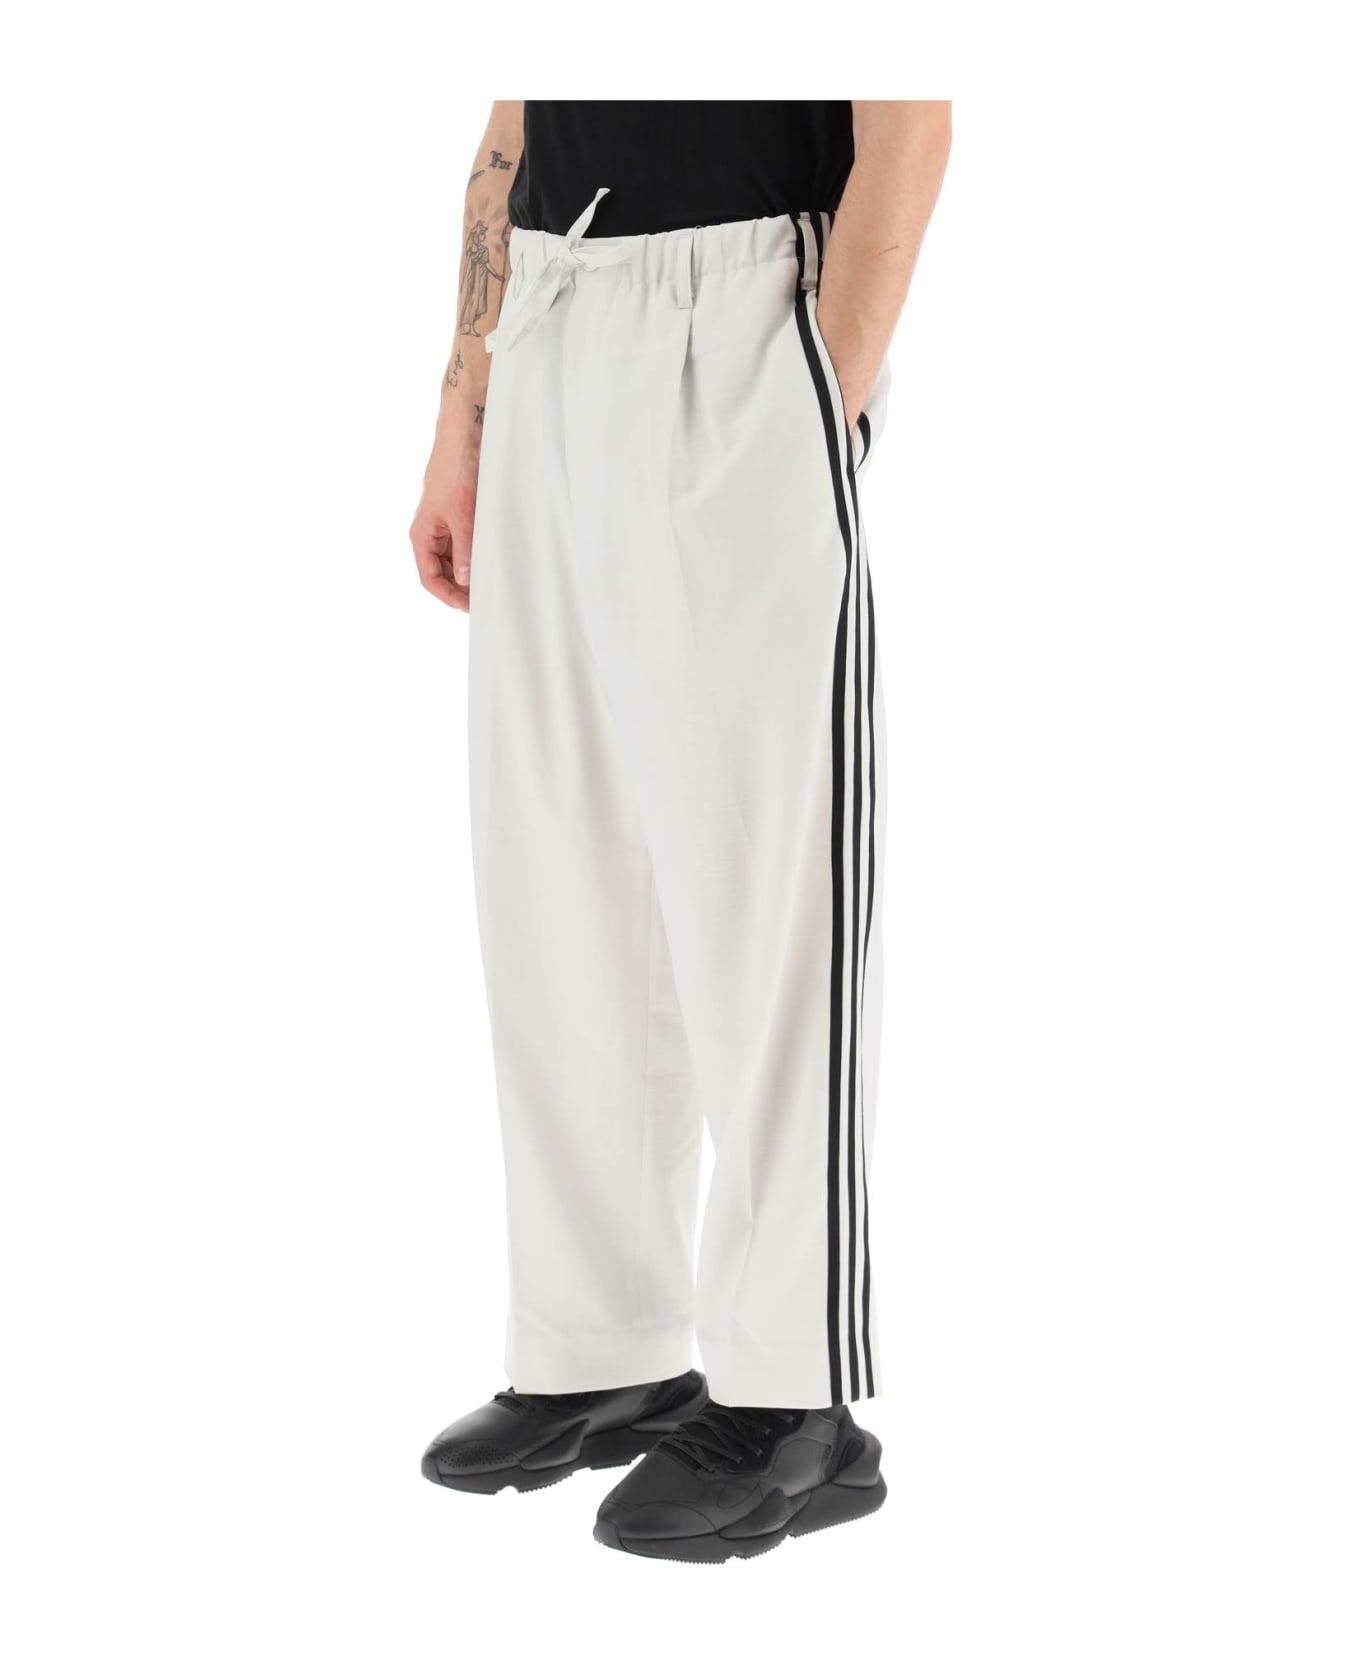 Y-3 Lightweight Twill Pants With Side Stripes - ORBIT GREY (White) ボトムス